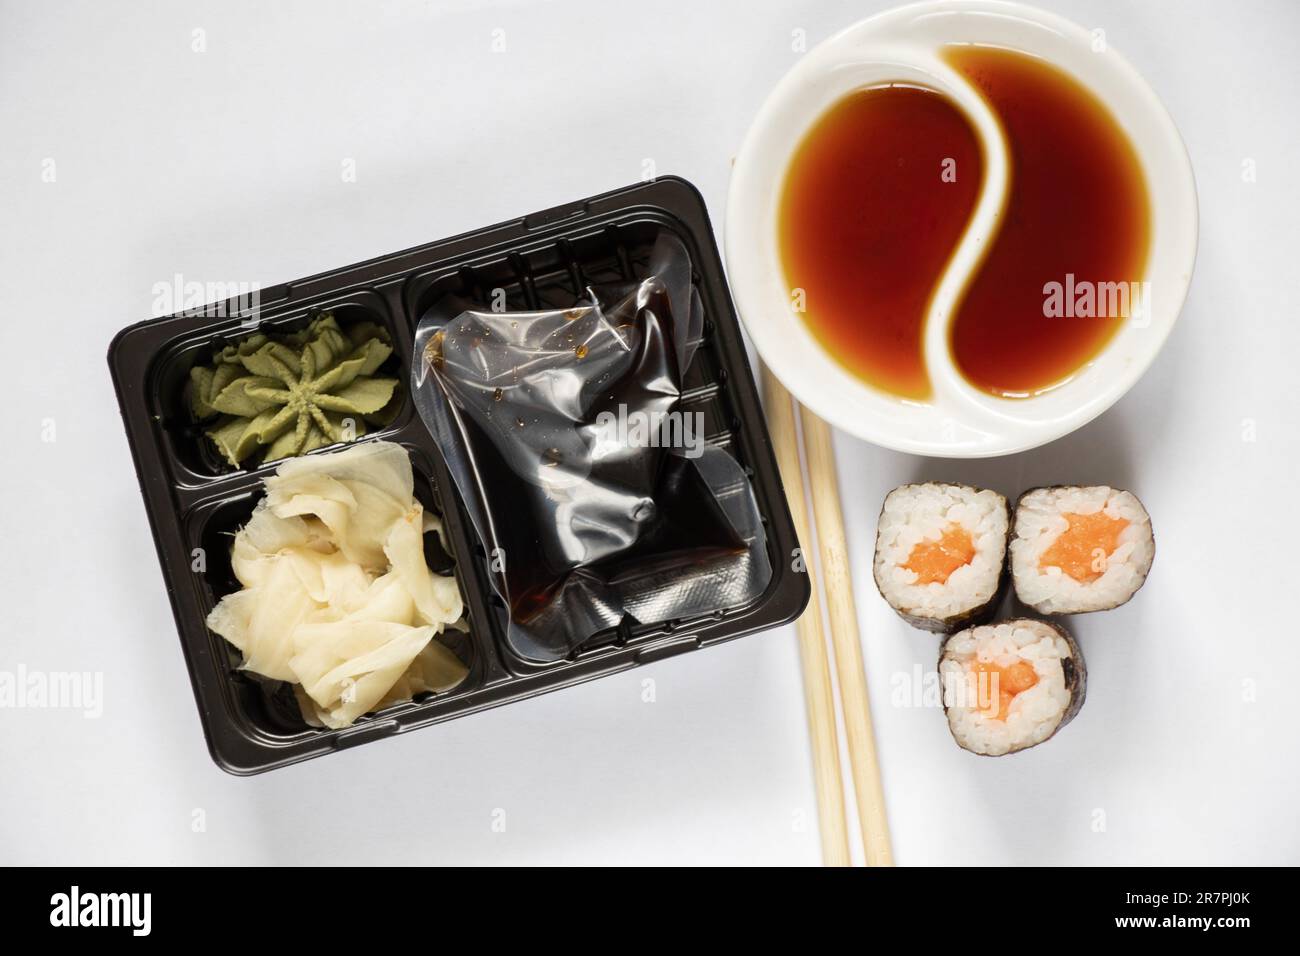 https://c8.alamy.com/comp/2R7PJ0K/food-container-for-delivery-of-sushi-soy-sauce-and-wasabi-with-food-delivery-from-sushi-restaurant-2R7PJ0K.jpg